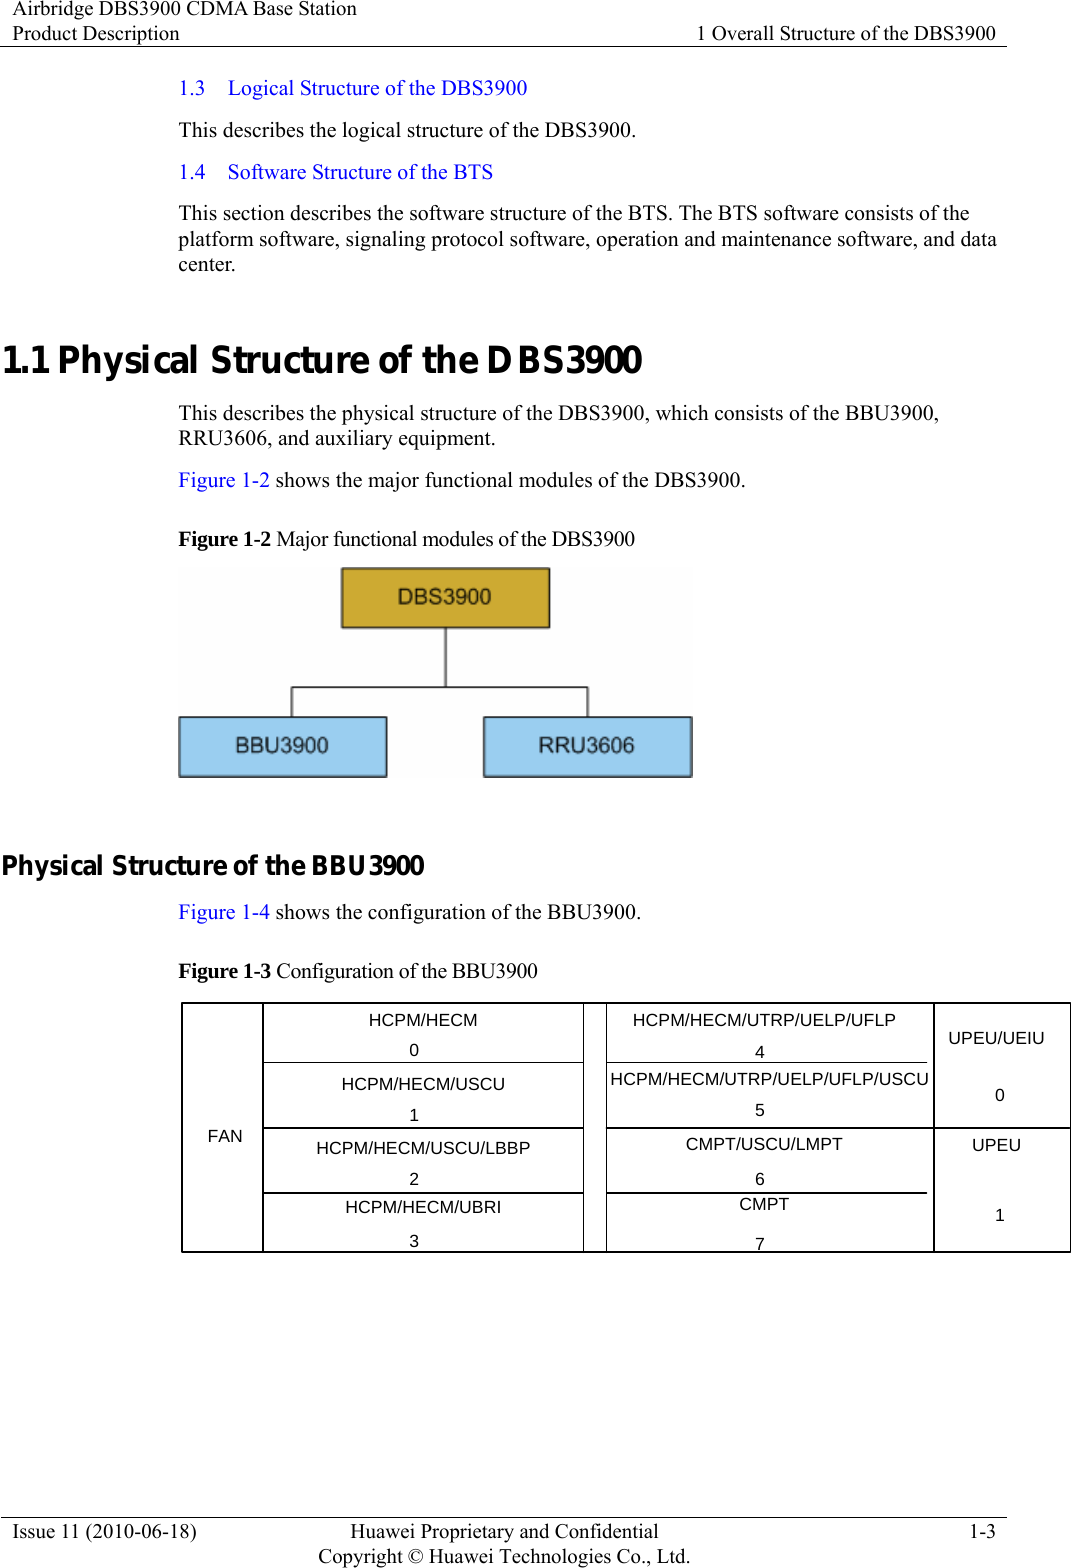 Airbridge DBS3900 CDMA Base Station Product Description  1 Overall Structure of the DBS3900 Issue 11 (2010-06-18)  Huawei Proprietary and Confidential         Copyright © Huawei Technologies Co., Ltd.1-3 1.3  Logical Structure of the DBS3900 This describes the logical structure of the DBS3900. 1.4  Software Structure of the BTS This section describes the software structure of the BTS. The BTS software consists of the platform software, signaling protocol software, operation and maintenance software, and data center. 1.1 Physical Structure of the DBS3900 This describes the physical structure of the DBS3900, which consists of the BBU3900, RRU3606, and auxiliary equipment. Figure 1-2 shows the major functional modules of the DBS3900. Figure 1-2 Major functional modules of the DBS3900   Physical Structure of the BBU3900 Figure 1-4 shows the configuration of the BBU3900. Figure 1-3 Configuration of the BBU3900 FANUPEU/UEIUCMPTCMPT/USCU/LMPTHCPM/HECM/UTRP/UELP/UFLPHCPM/HECM/UBRIHCPM/HECM/USCUHCPM/HECMUPEUHCPM/HECM/USCU/LBBPHCPM/HECM/UTRP/UELP/UFLP/USCU0123456701  